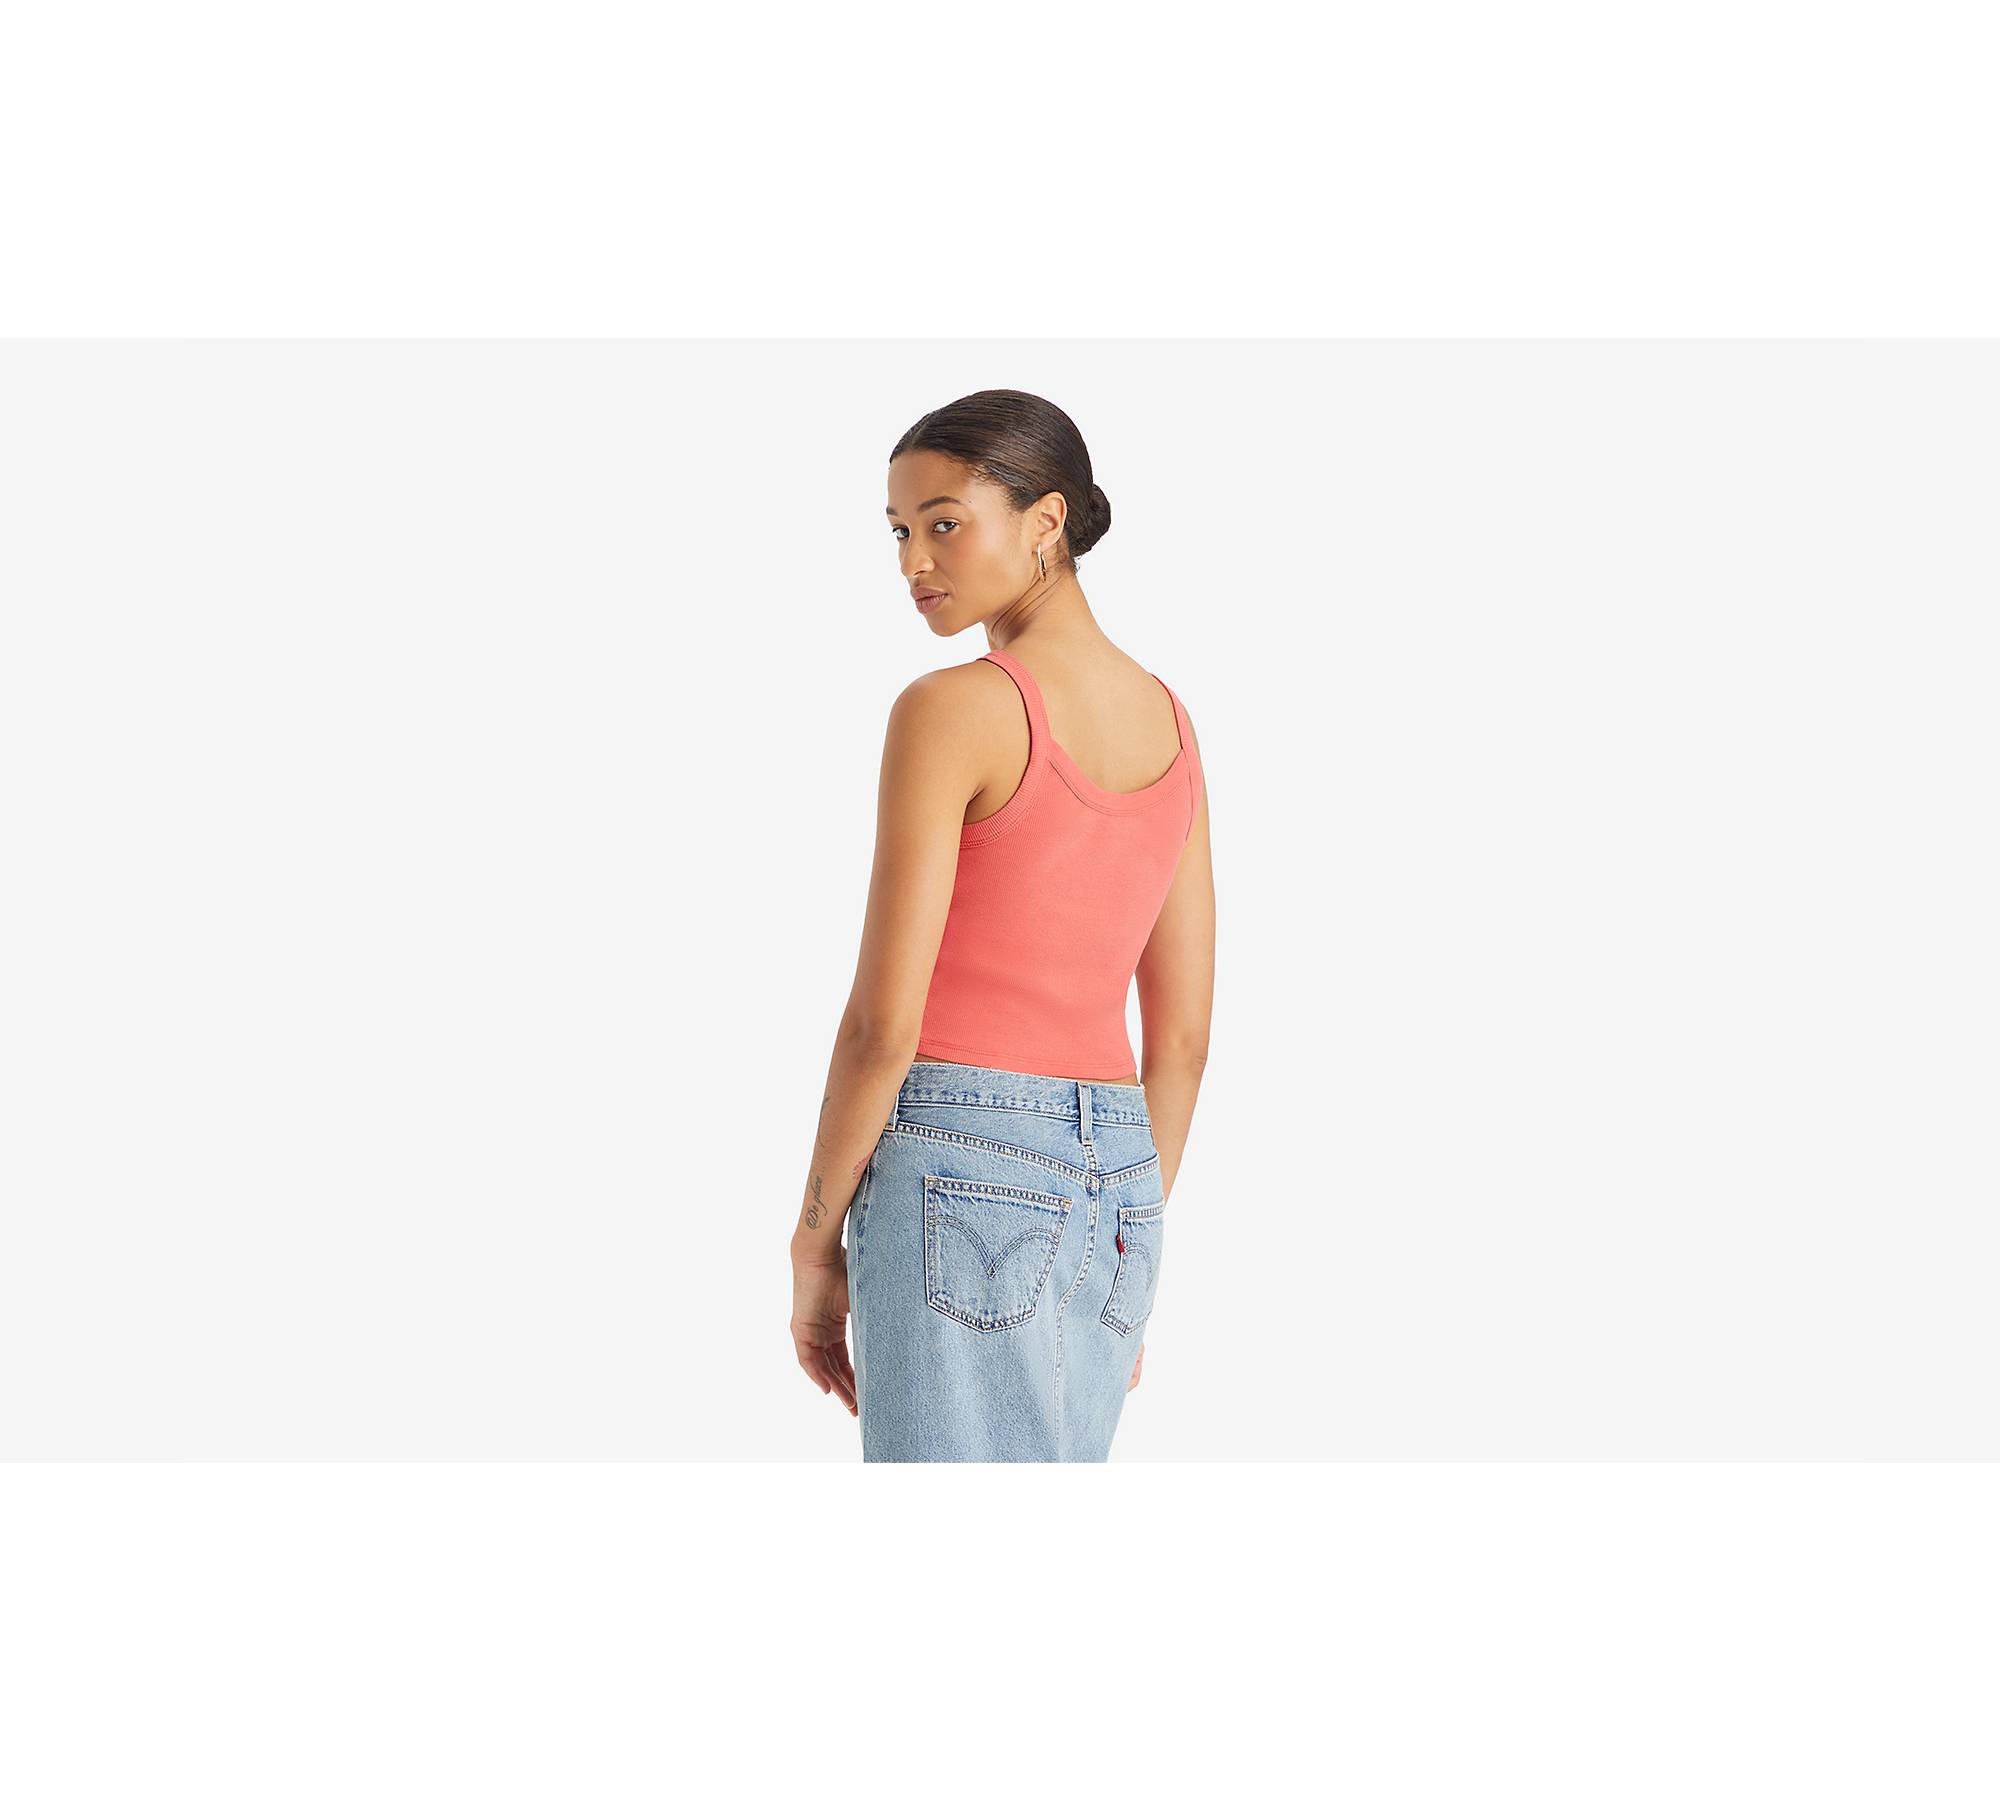 Picot-trimmed Camisole Top - Light pink - Ladies